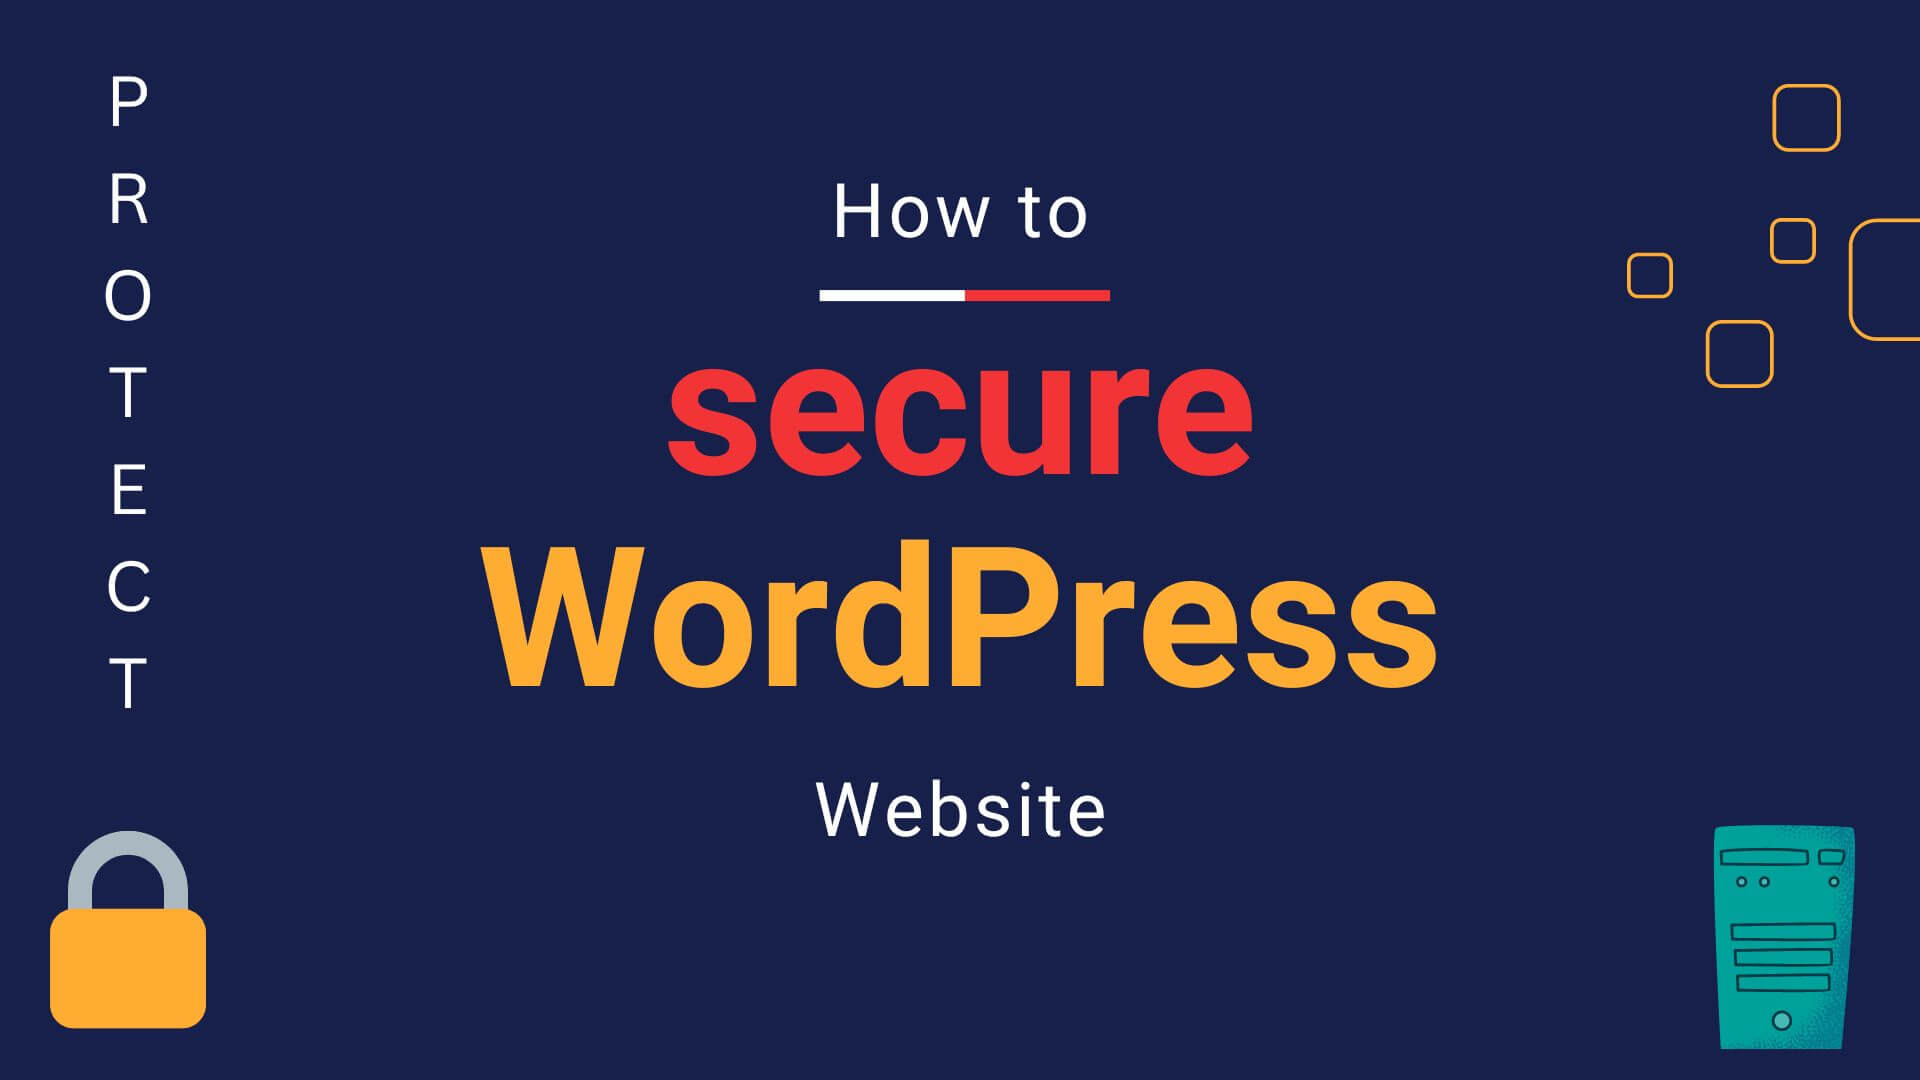 How to Secure a WordPress website